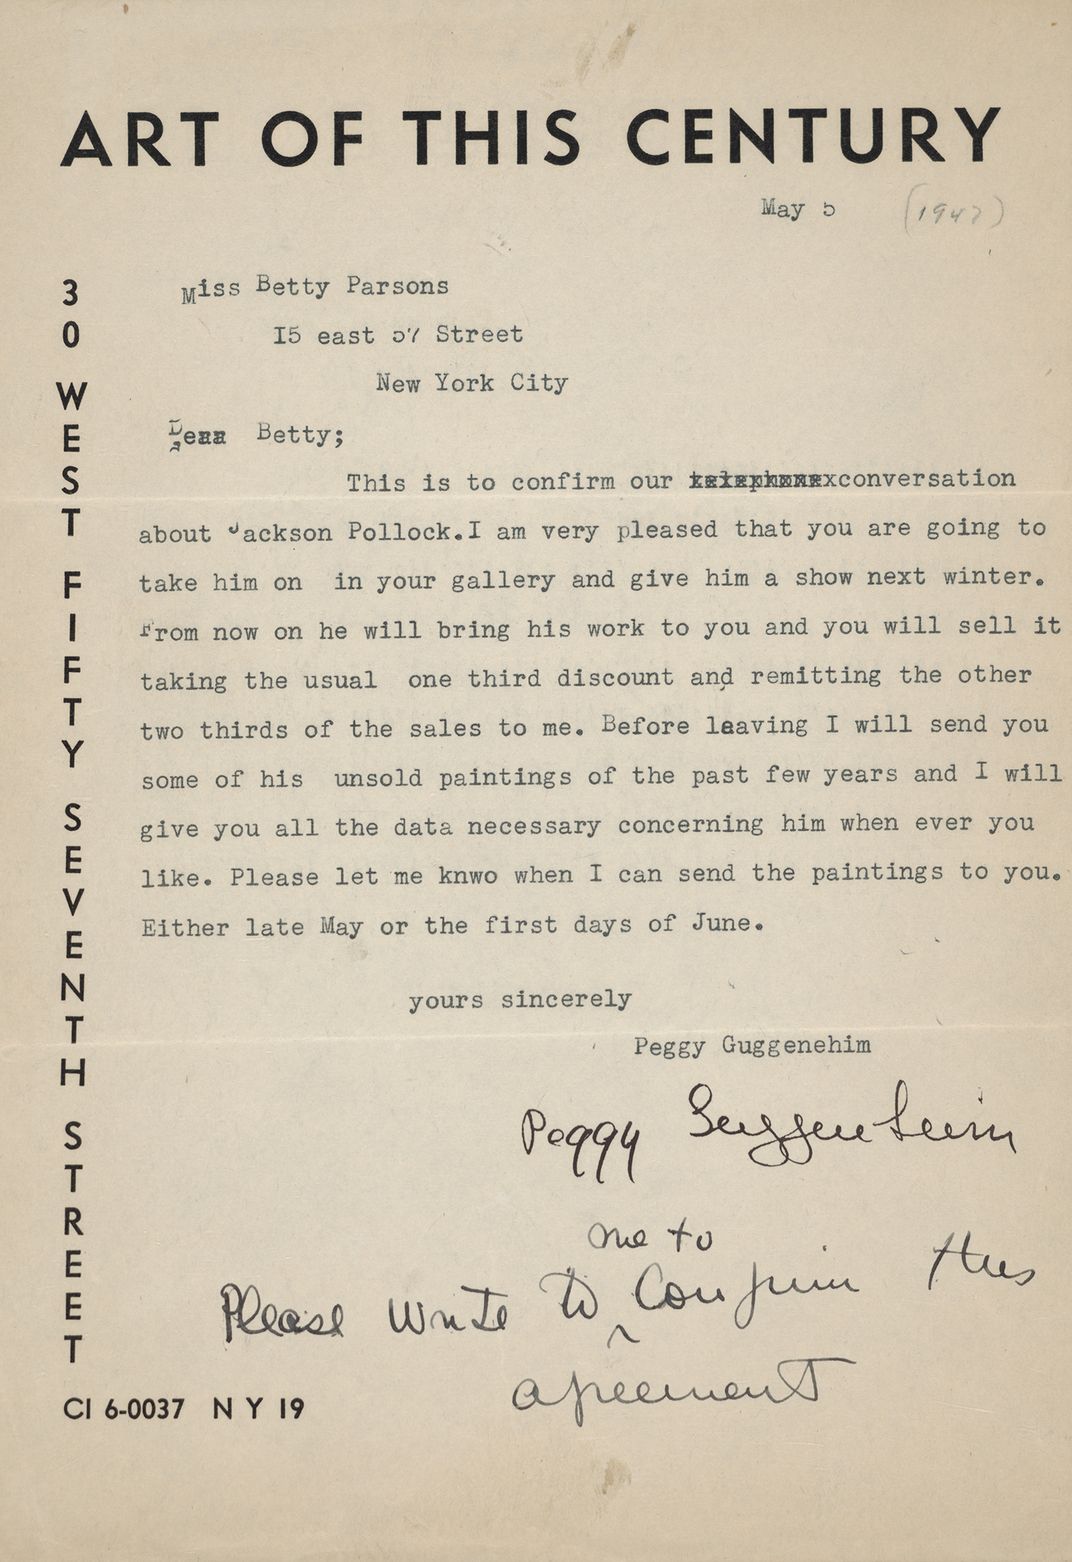 Letter from Peggy Guggenheim to Betty Parsons